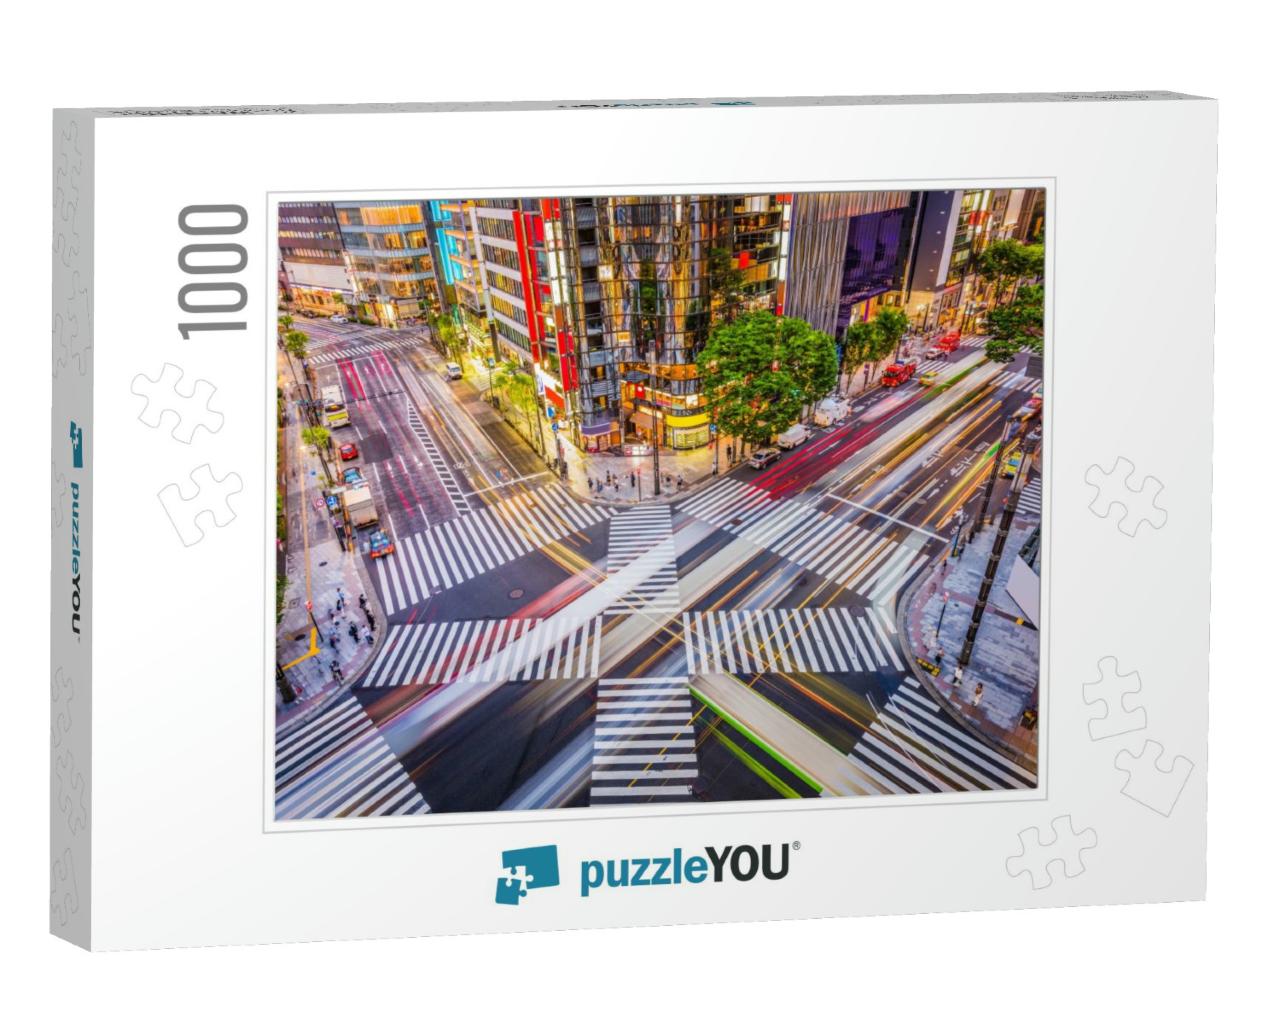 Tokyo, Japan Cityscape & Crosstown Traffic in the Ginza D... Jigsaw Puzzle with 1000 pieces